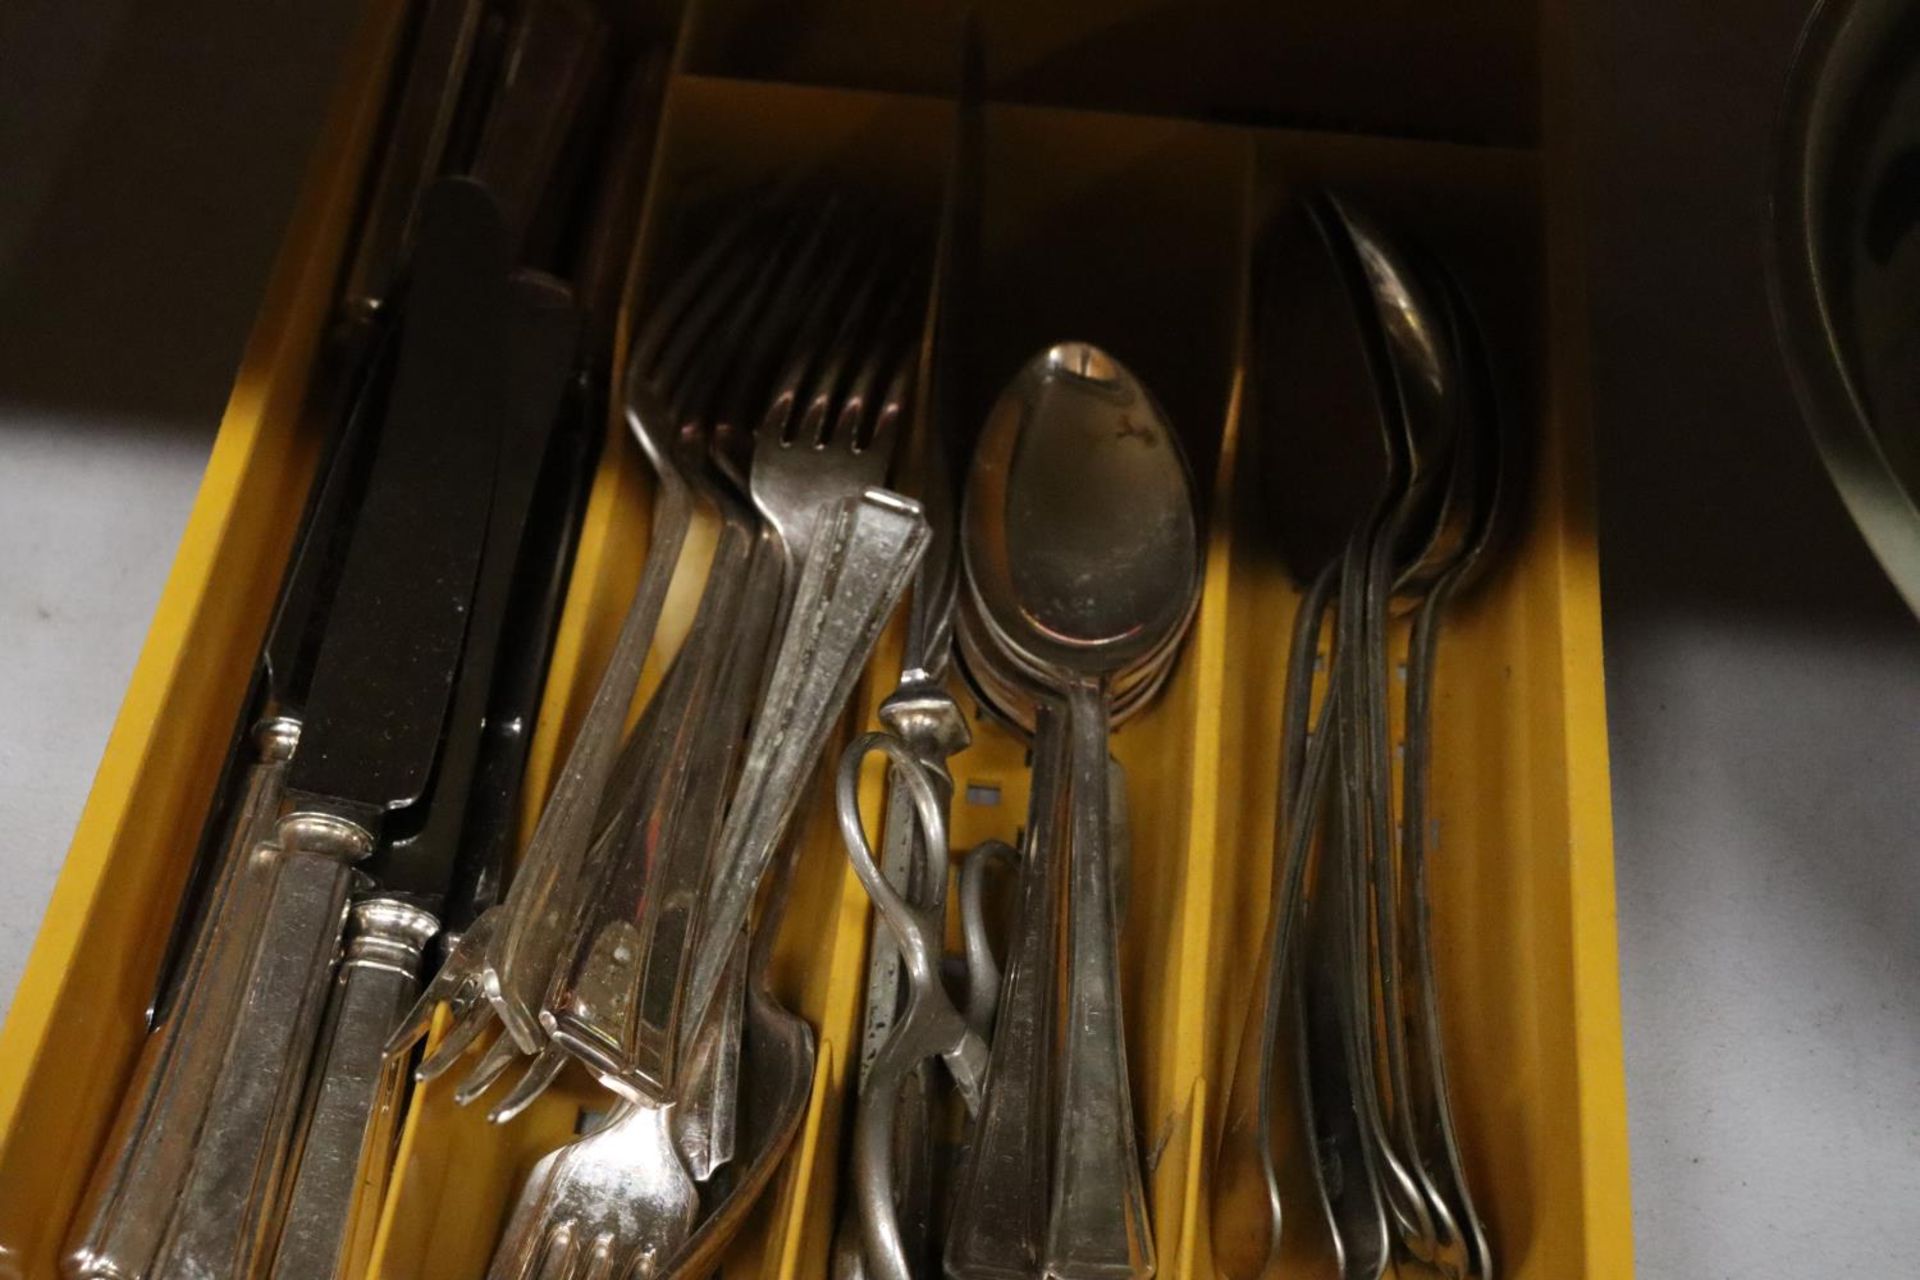 TWO TRAYS OF FLATWARE - Image 3 of 3